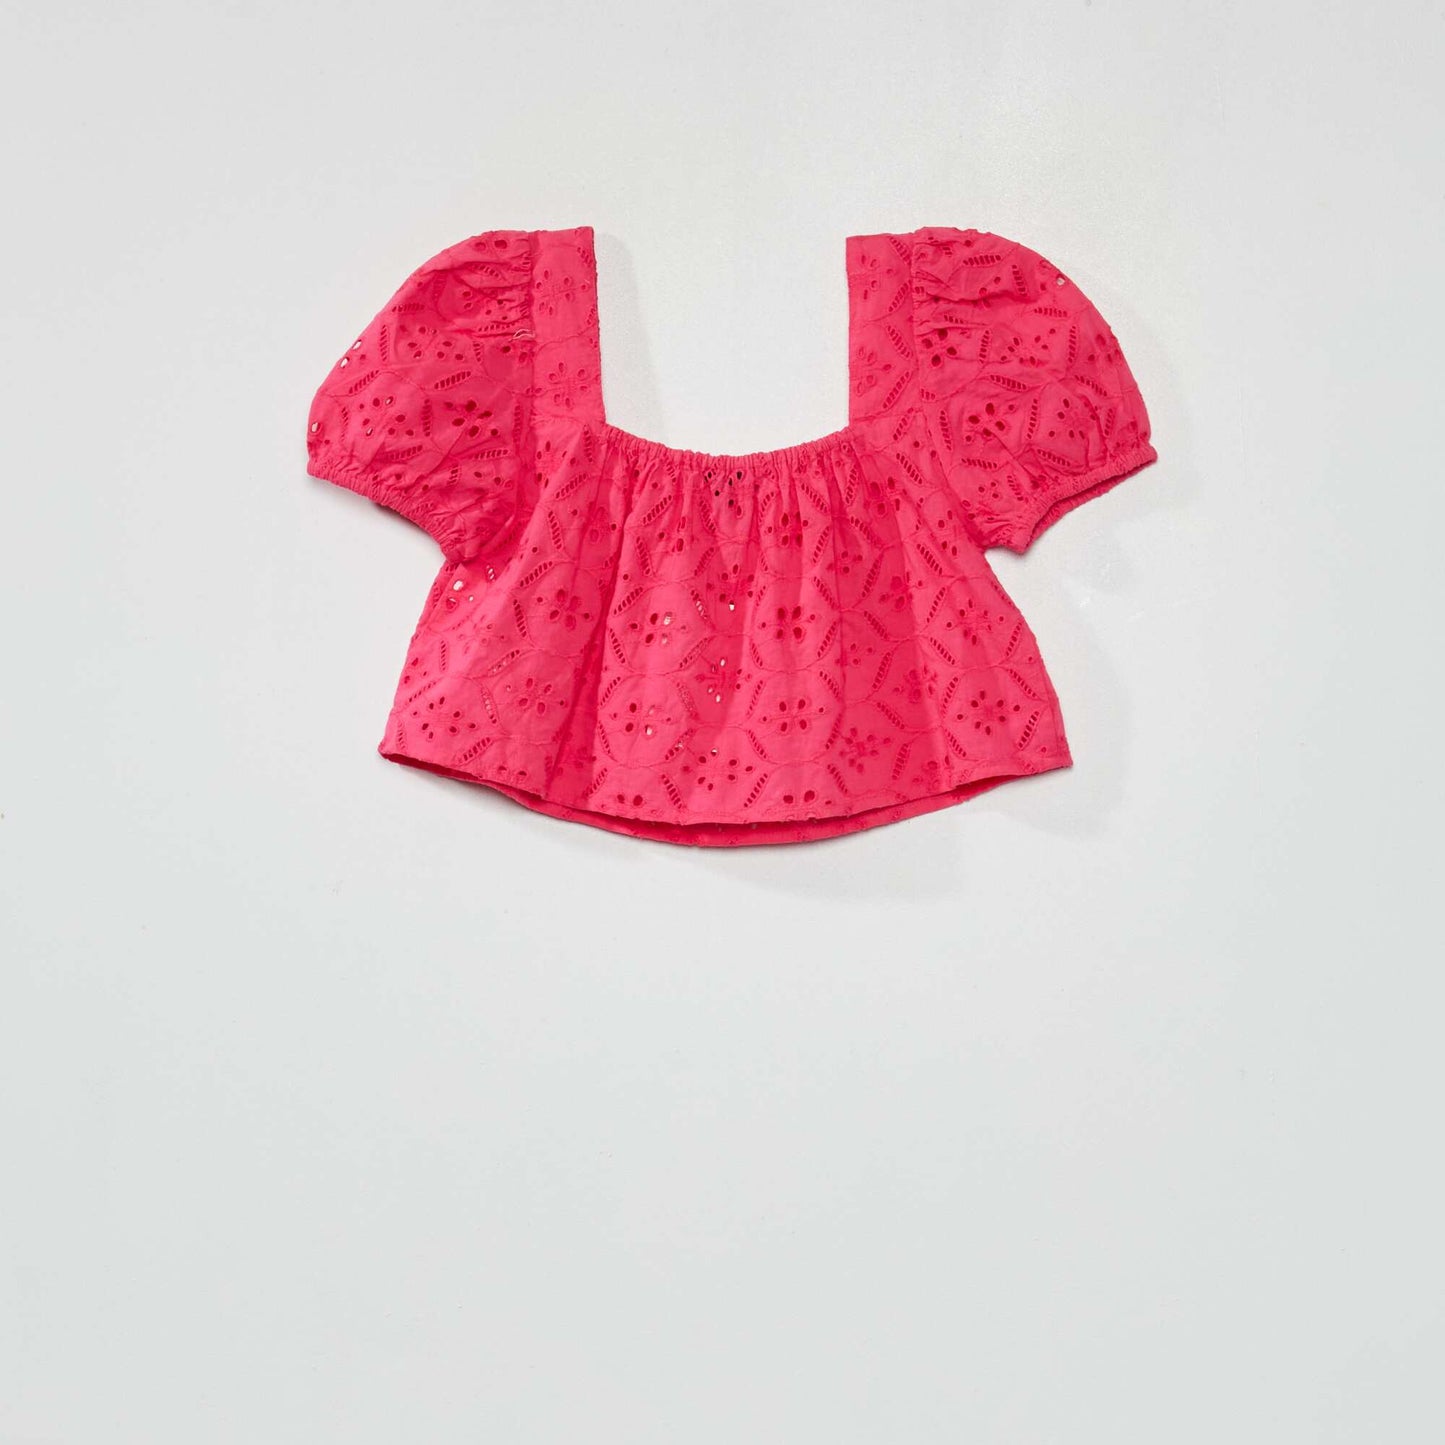 Blouse cropped en maille anglaise rose indien